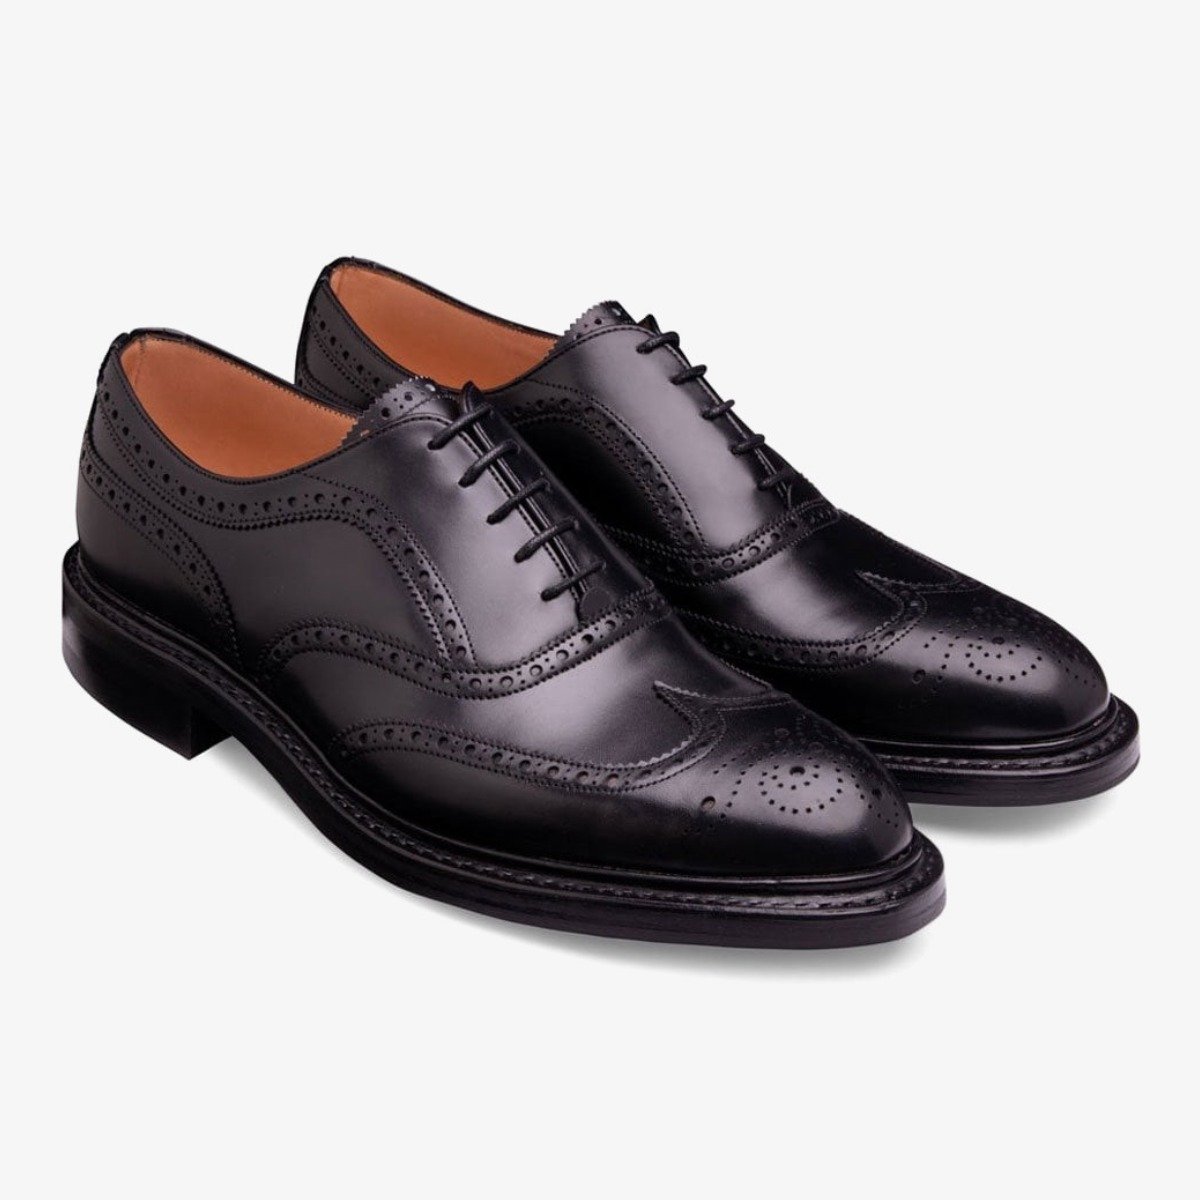 Cheaney Hythe II black brogue men's oxford shoes